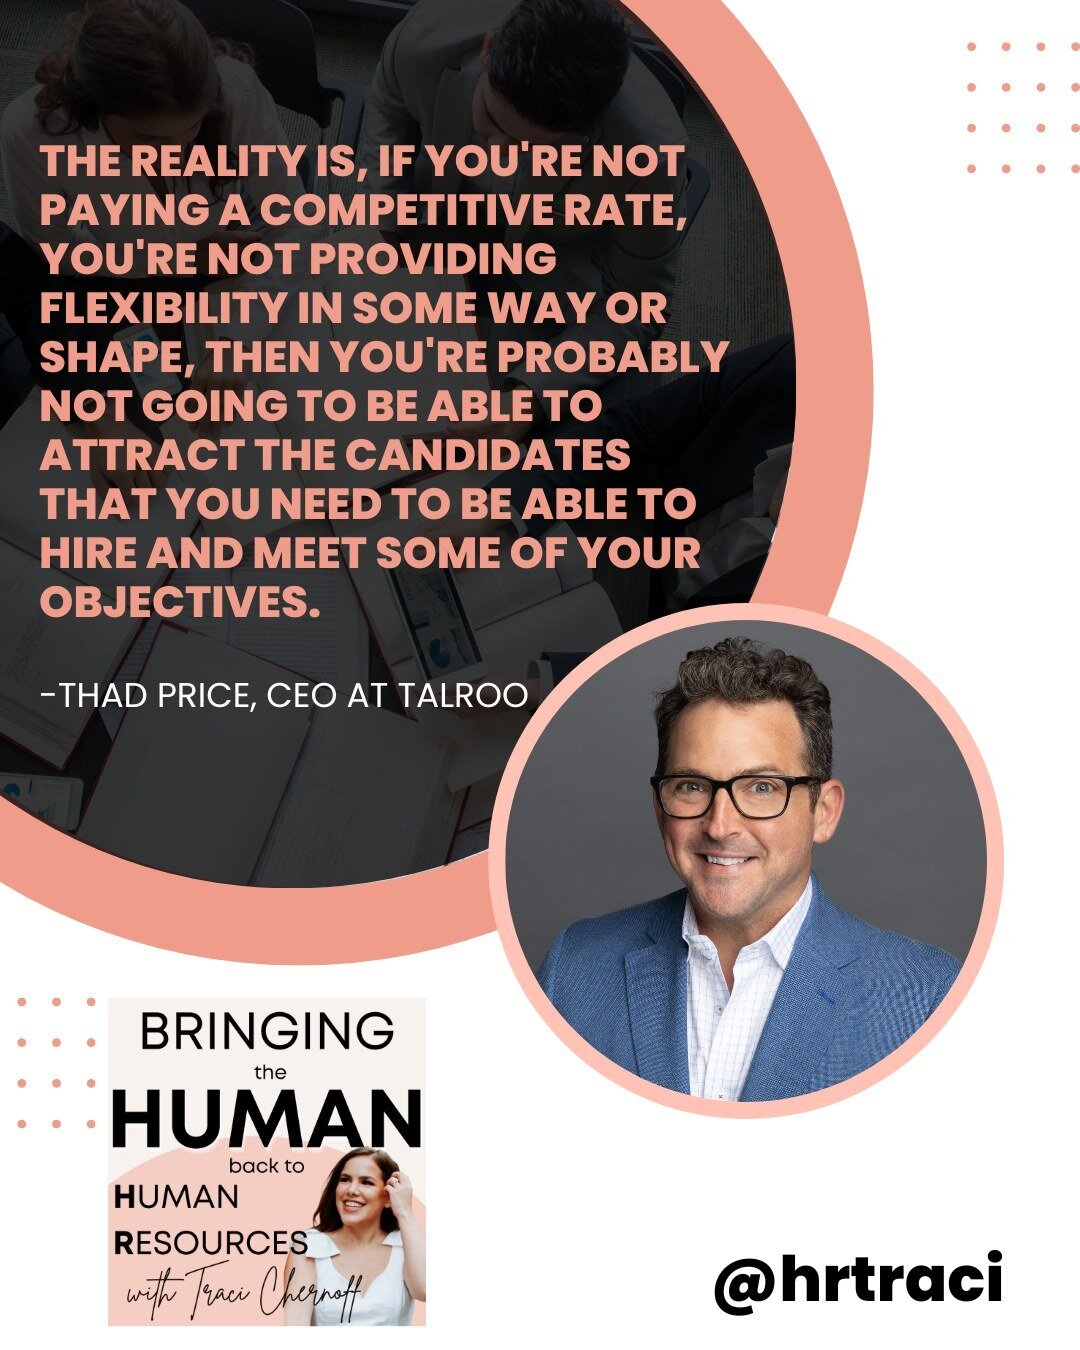 🎙️ Our latest podcast episode featuring Thad Price, CEO at Talroo, got us thinking about the evolving perspectives on flexibility in the workplace. Thad shared some valuable insights:

Flexibility means different things to frontline and knowledge wo